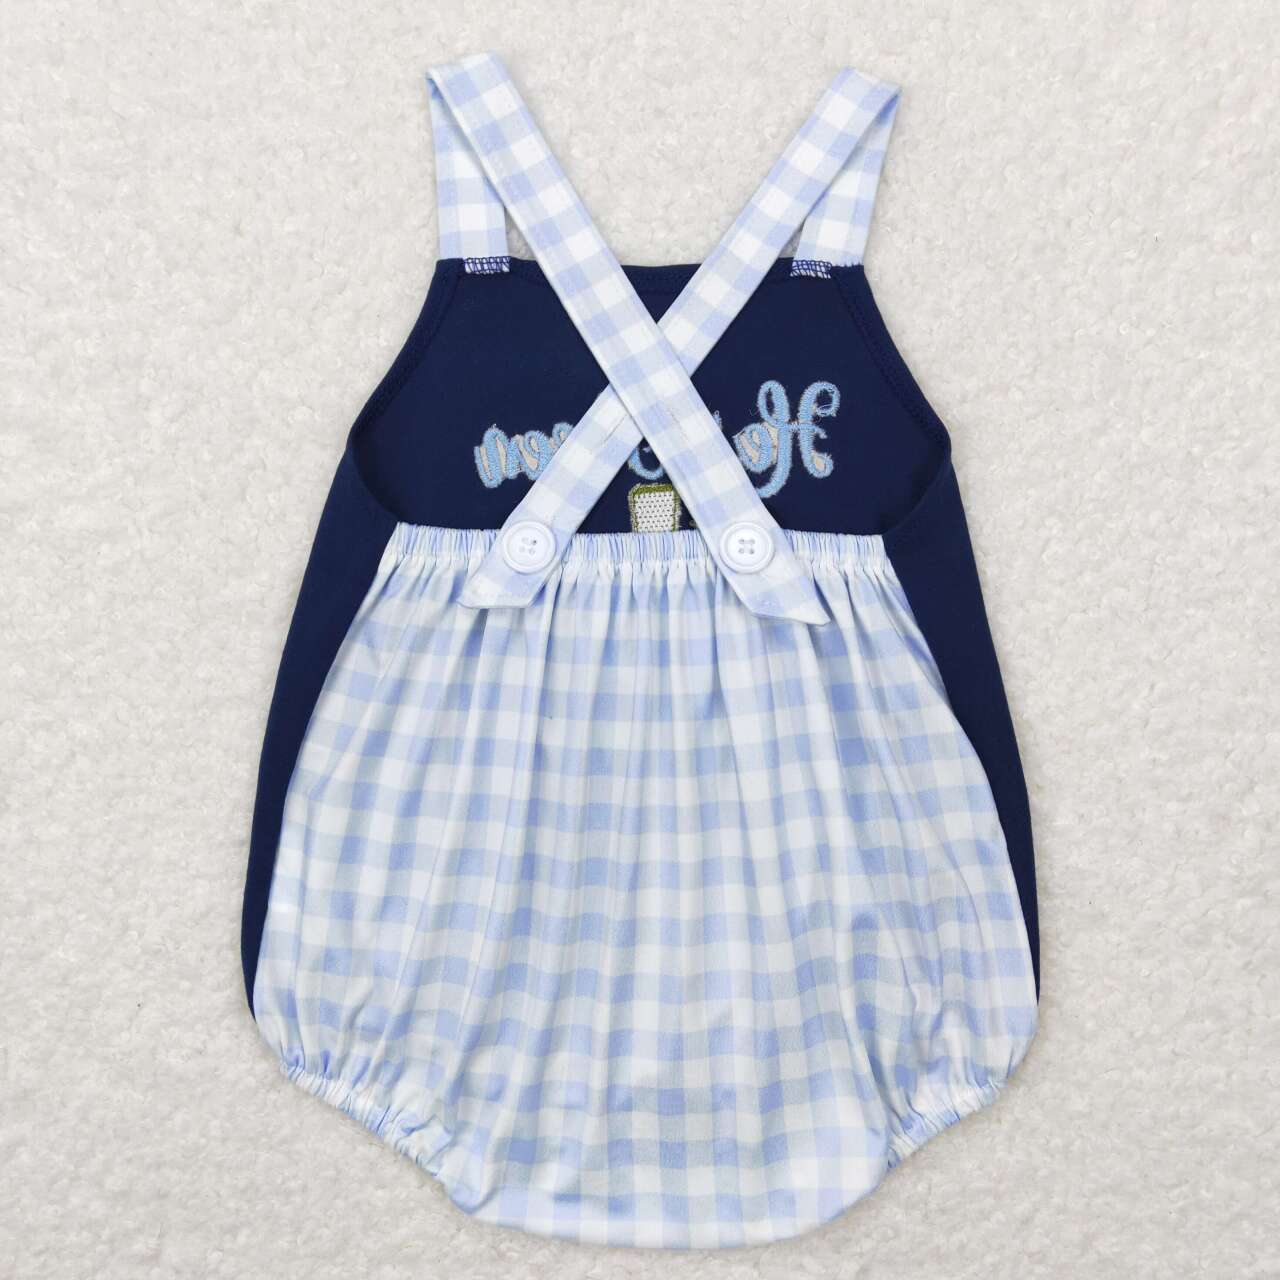 SR0565 he is risen navy blue blue and white plaid vest jumpsuit with embroidered cross